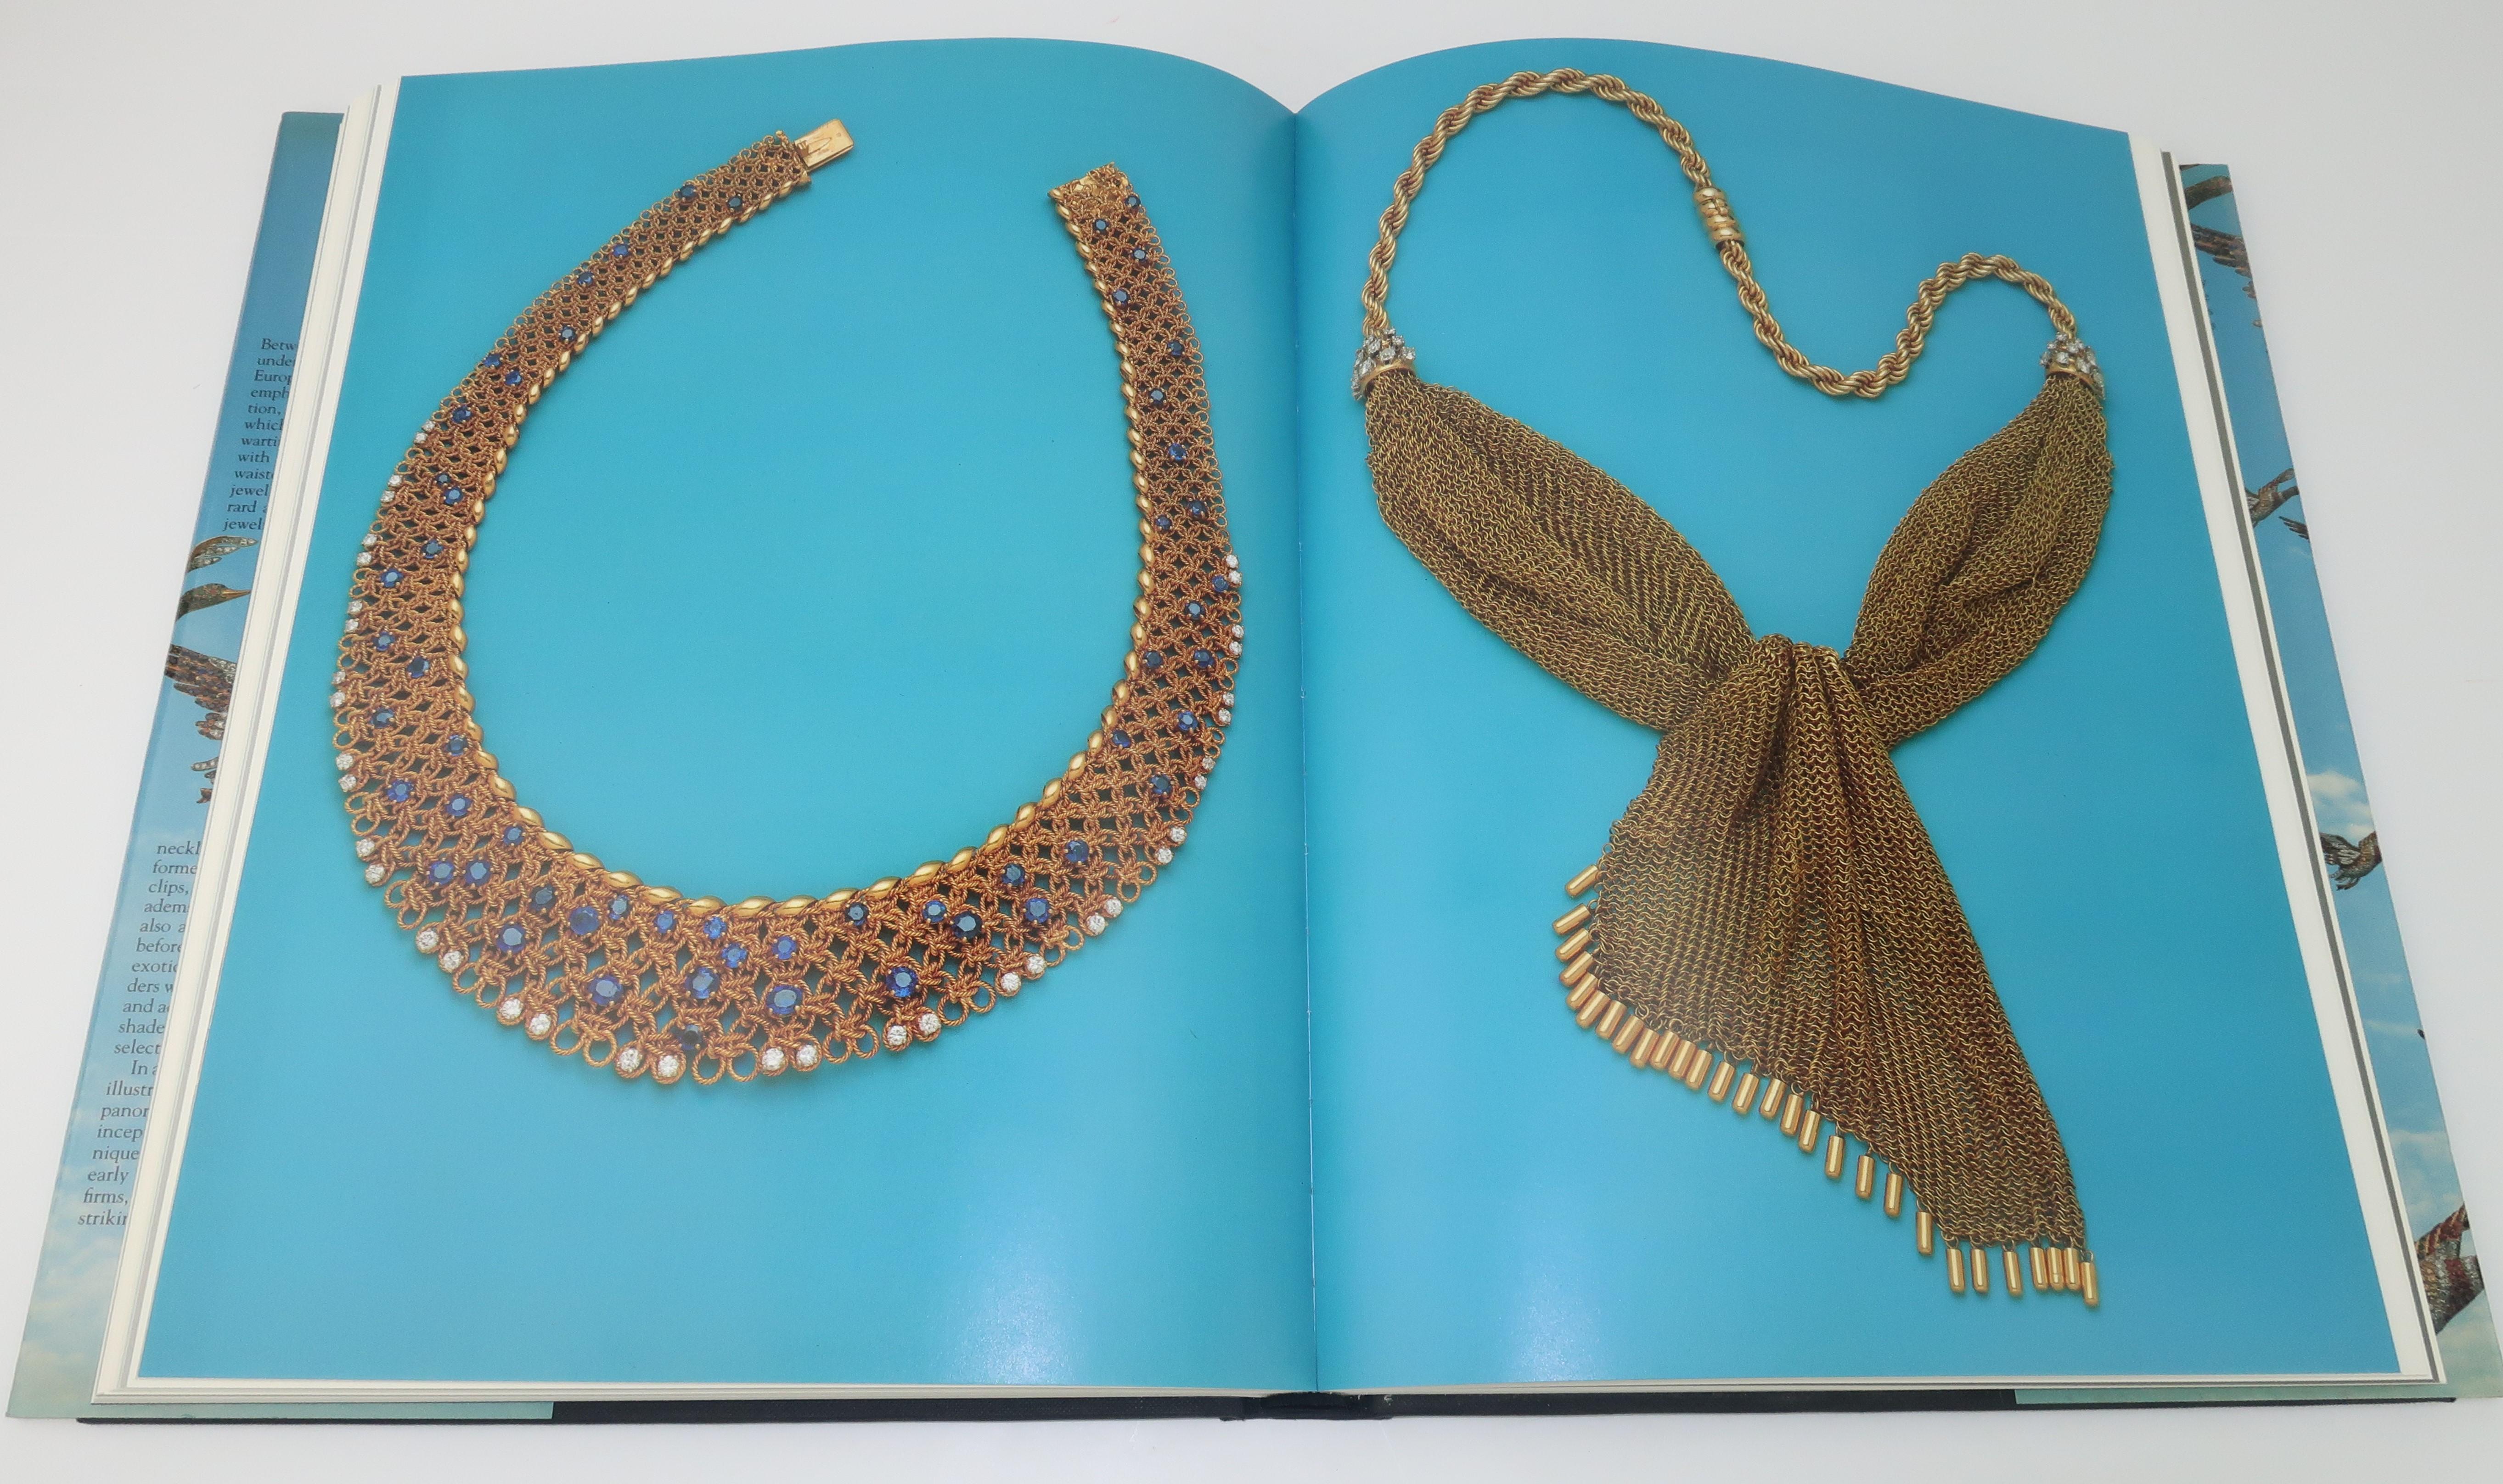 'Jewelry of the 1940s and 1950s' by Sylvie Raulet Collector's Coffee Table Book 2